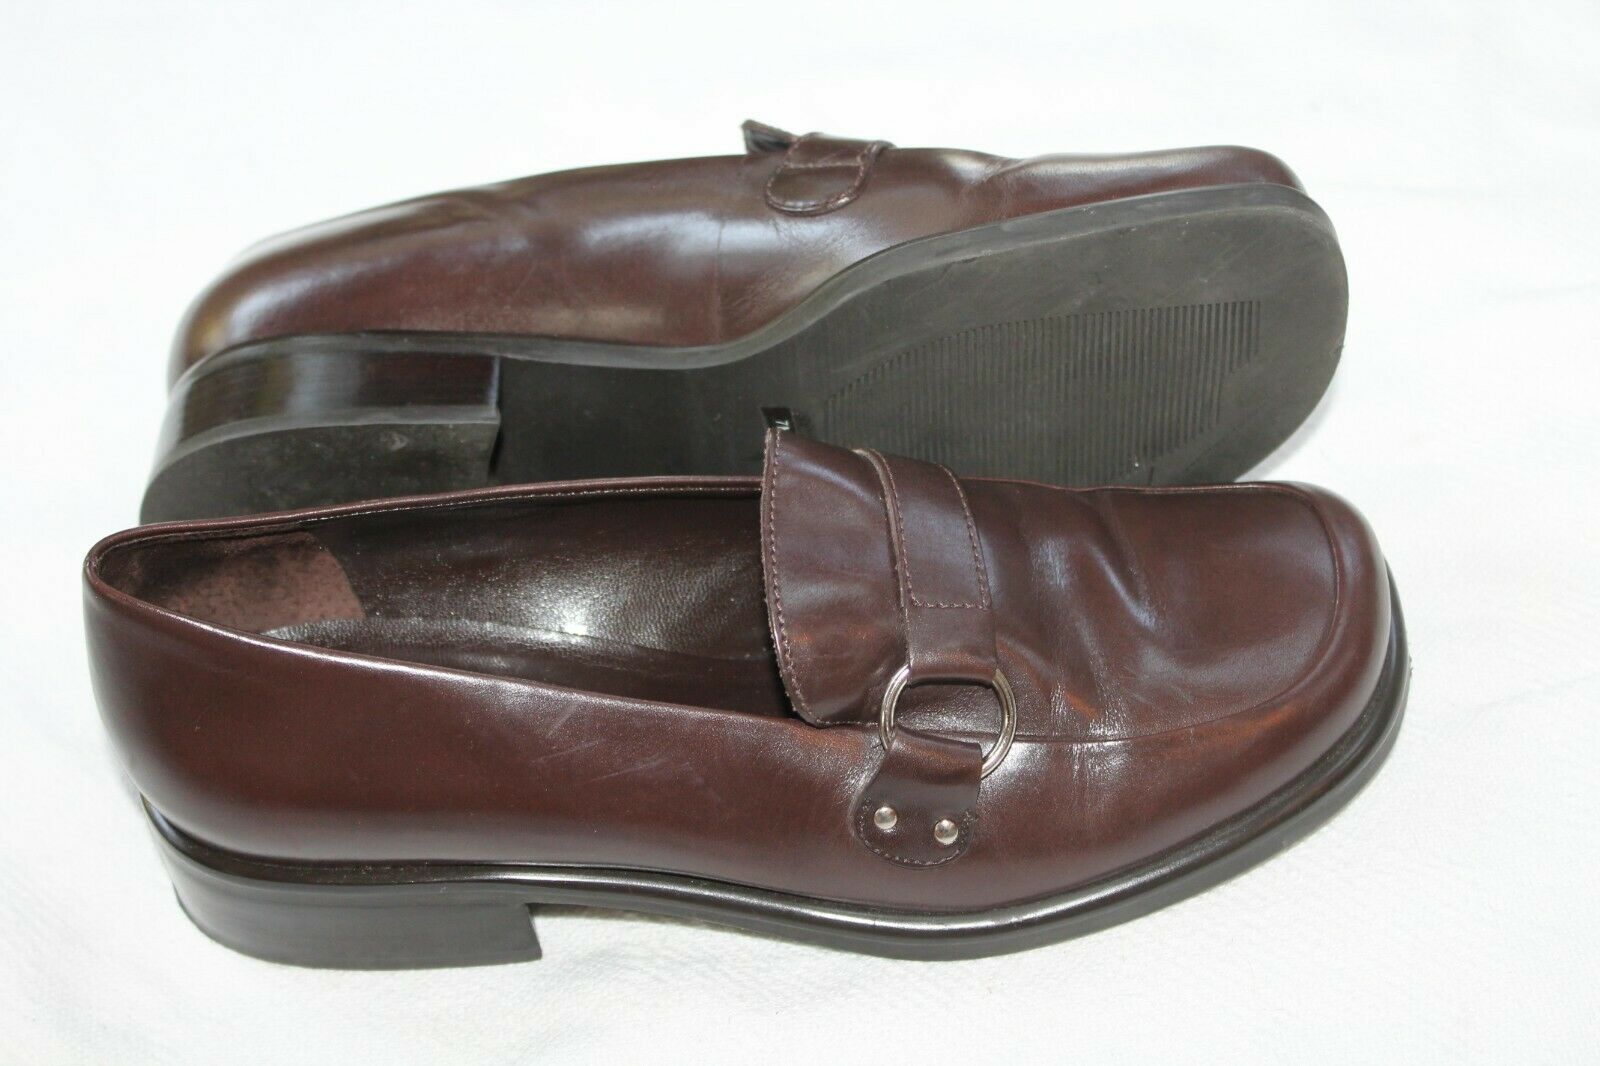 Primary image for FRANCO SARTO LADIES SZ 7 M BROWN LEATHER CLASSIC FLAT LOAFERS SHOES BOCCA